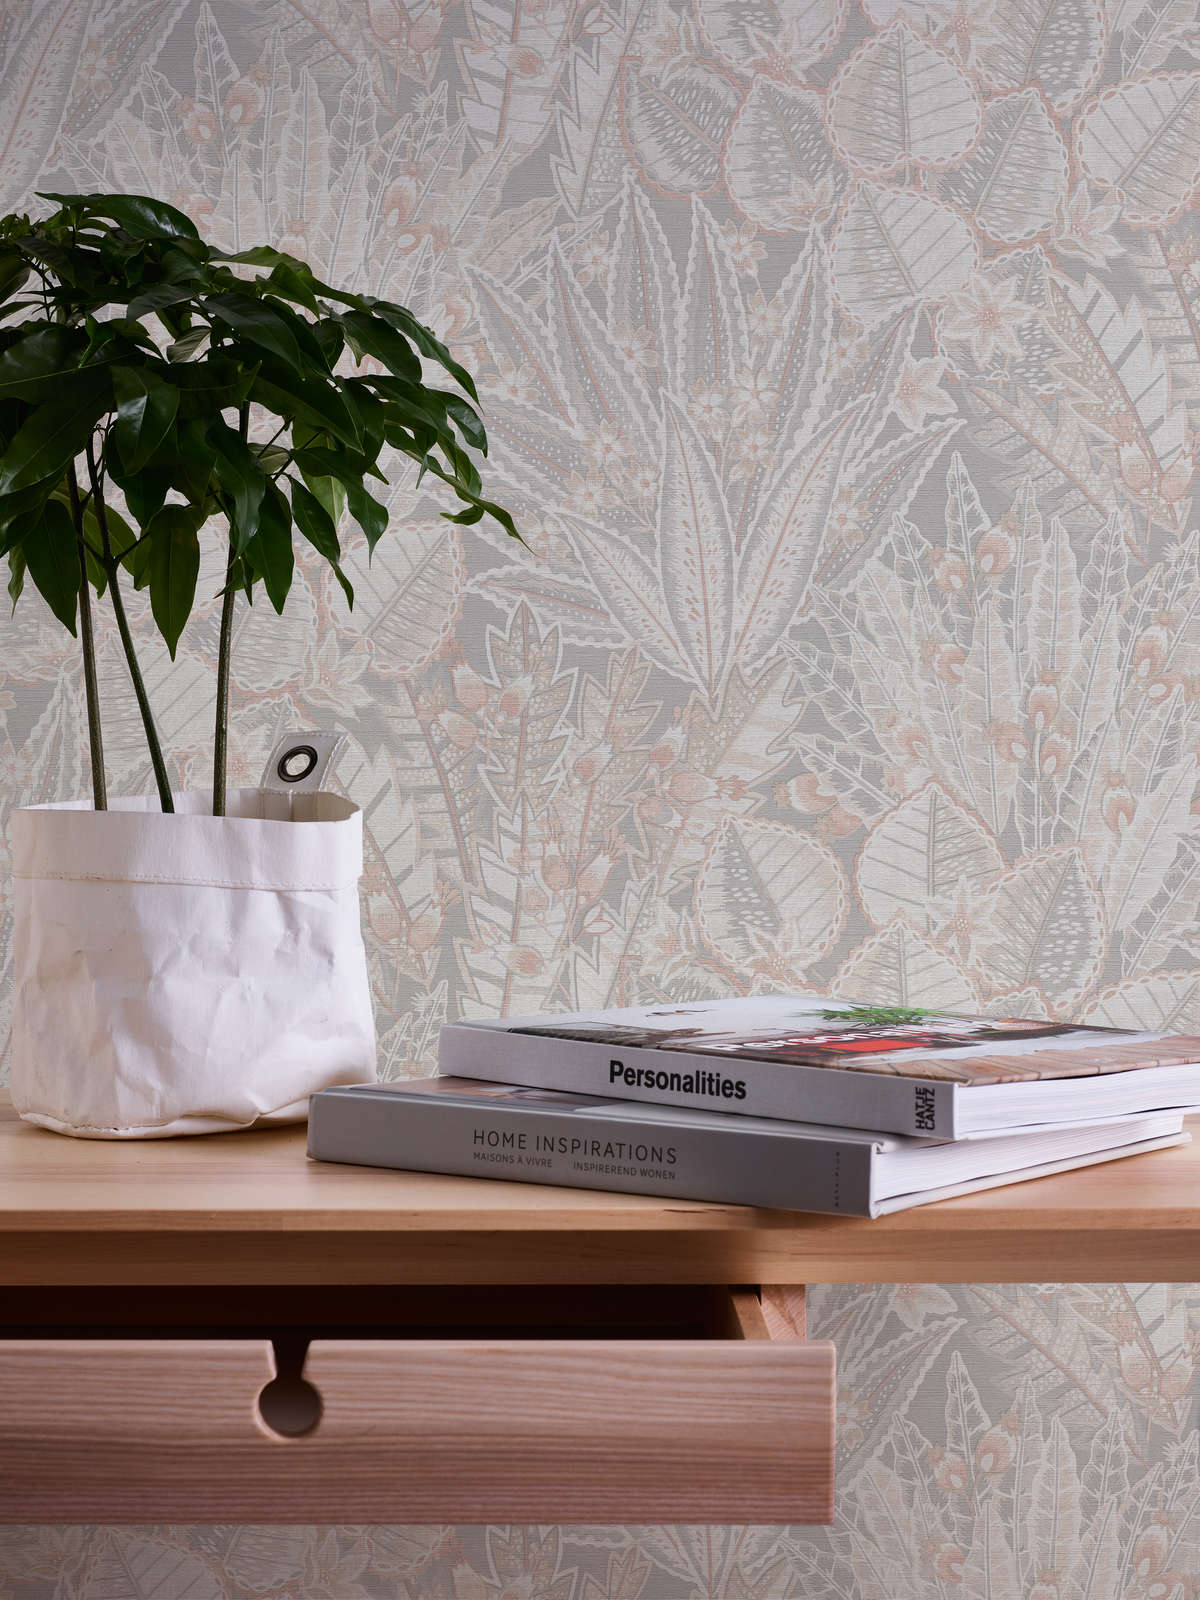             Floral non-woven wallpaper in soft colours and matt look - grey, beige, white
        